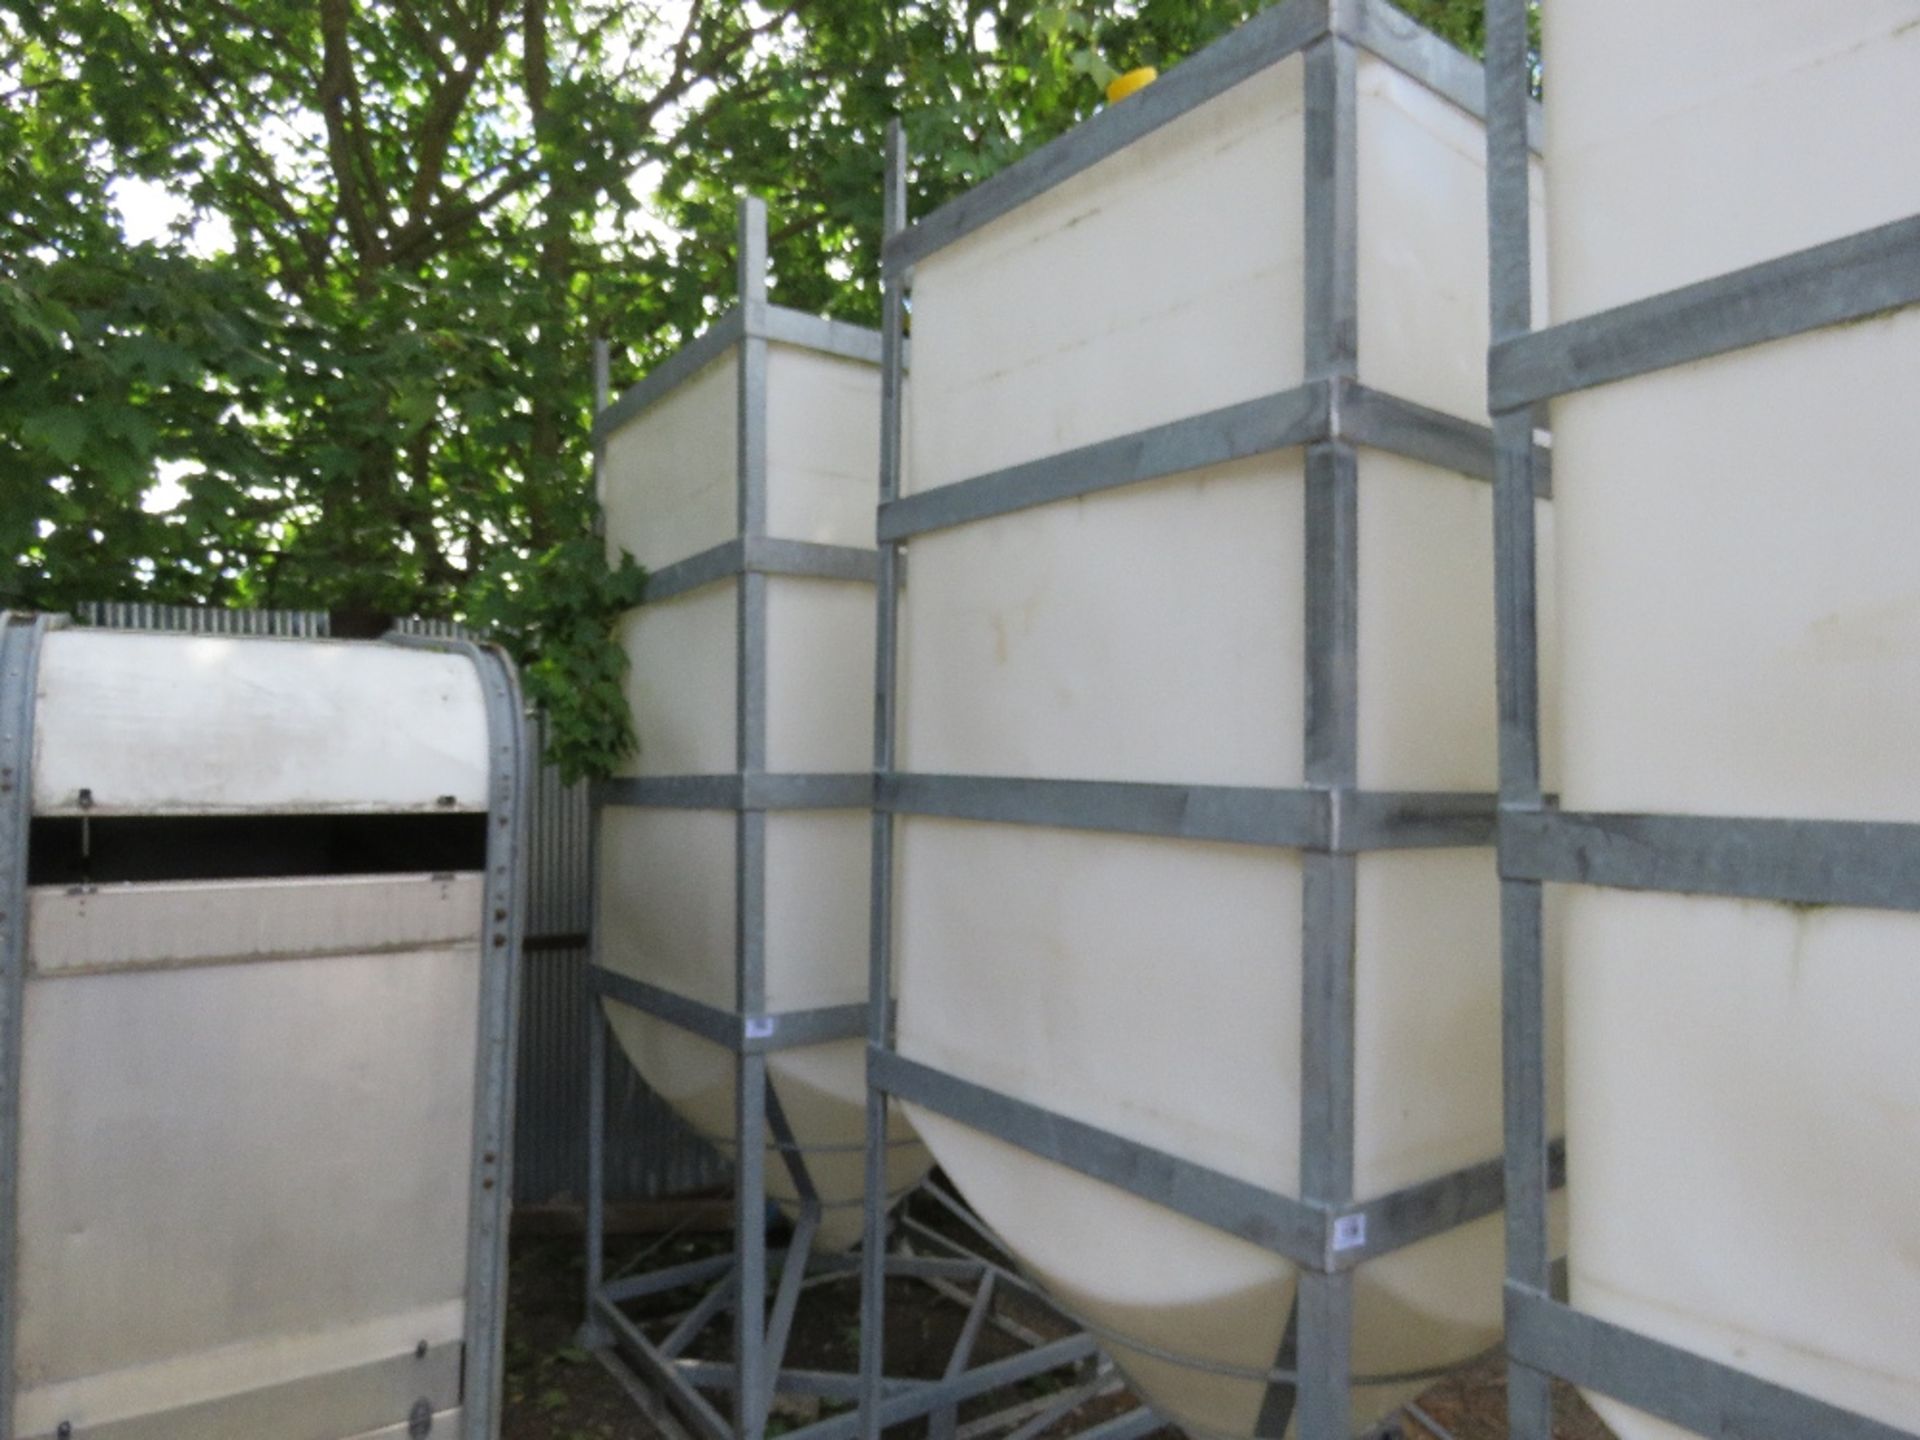 LARGE SIZED 2250 LITRE, YEAR 2013, WATER/LIQUID HOPPER IN FRAME. DIRECT EX SITE CLOSURE.